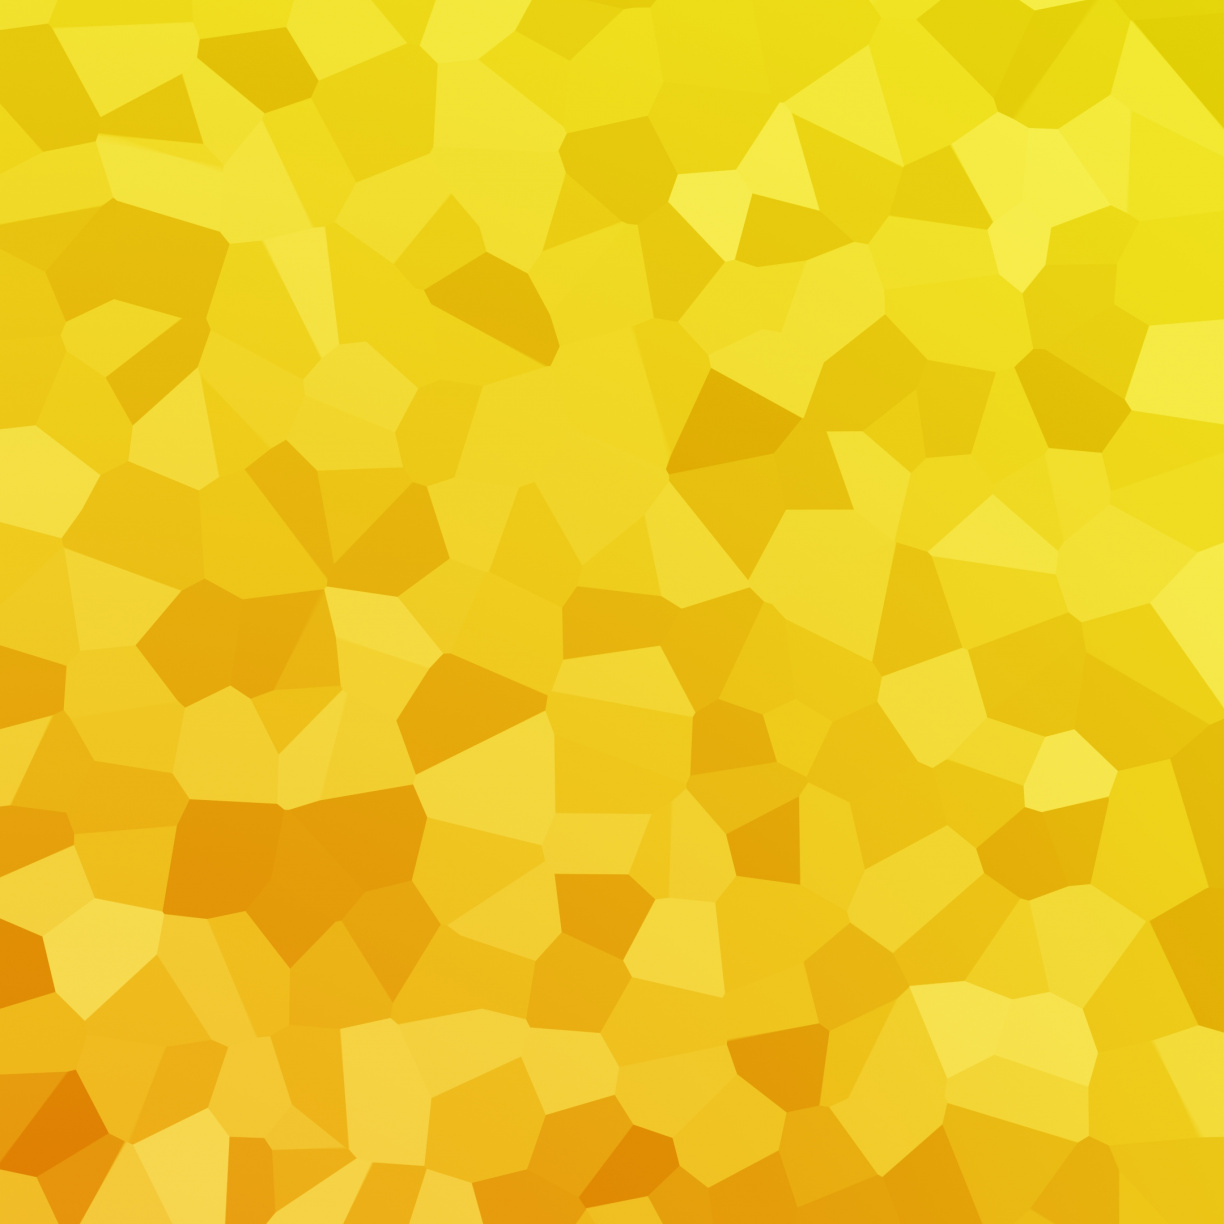 Yellow Pieces Abstract Geometric Wallpaper HD Image